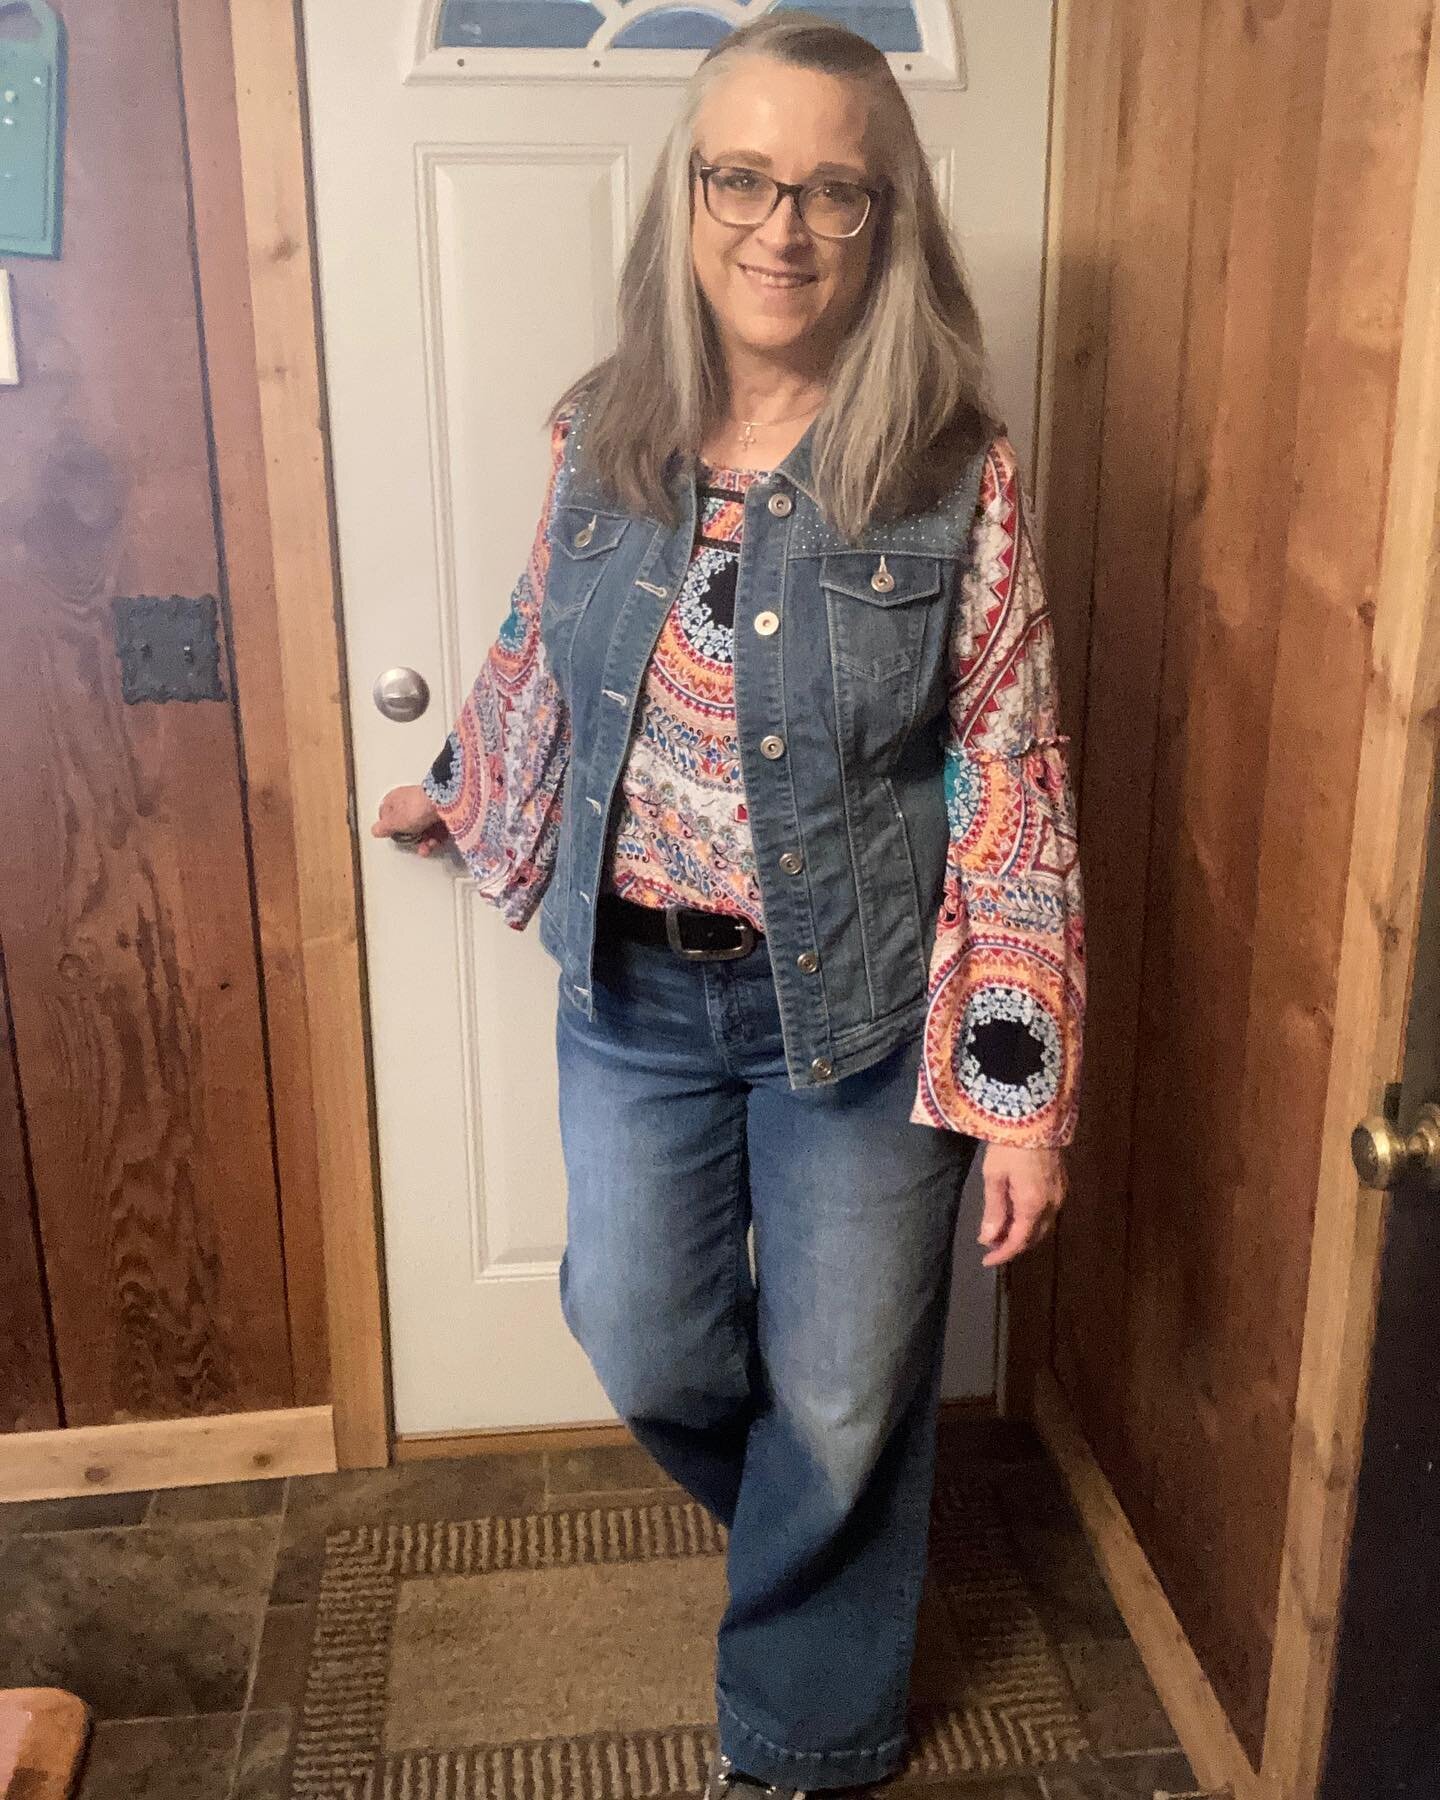 This was my traveling outfit today. Finishing out the week #mismatchmay style challenge with @crafty_thrifting and @prelovedlotta using the prompts denim, and layering. 

We had a challenging drive to our destination, because it is Orange Barrel Seas